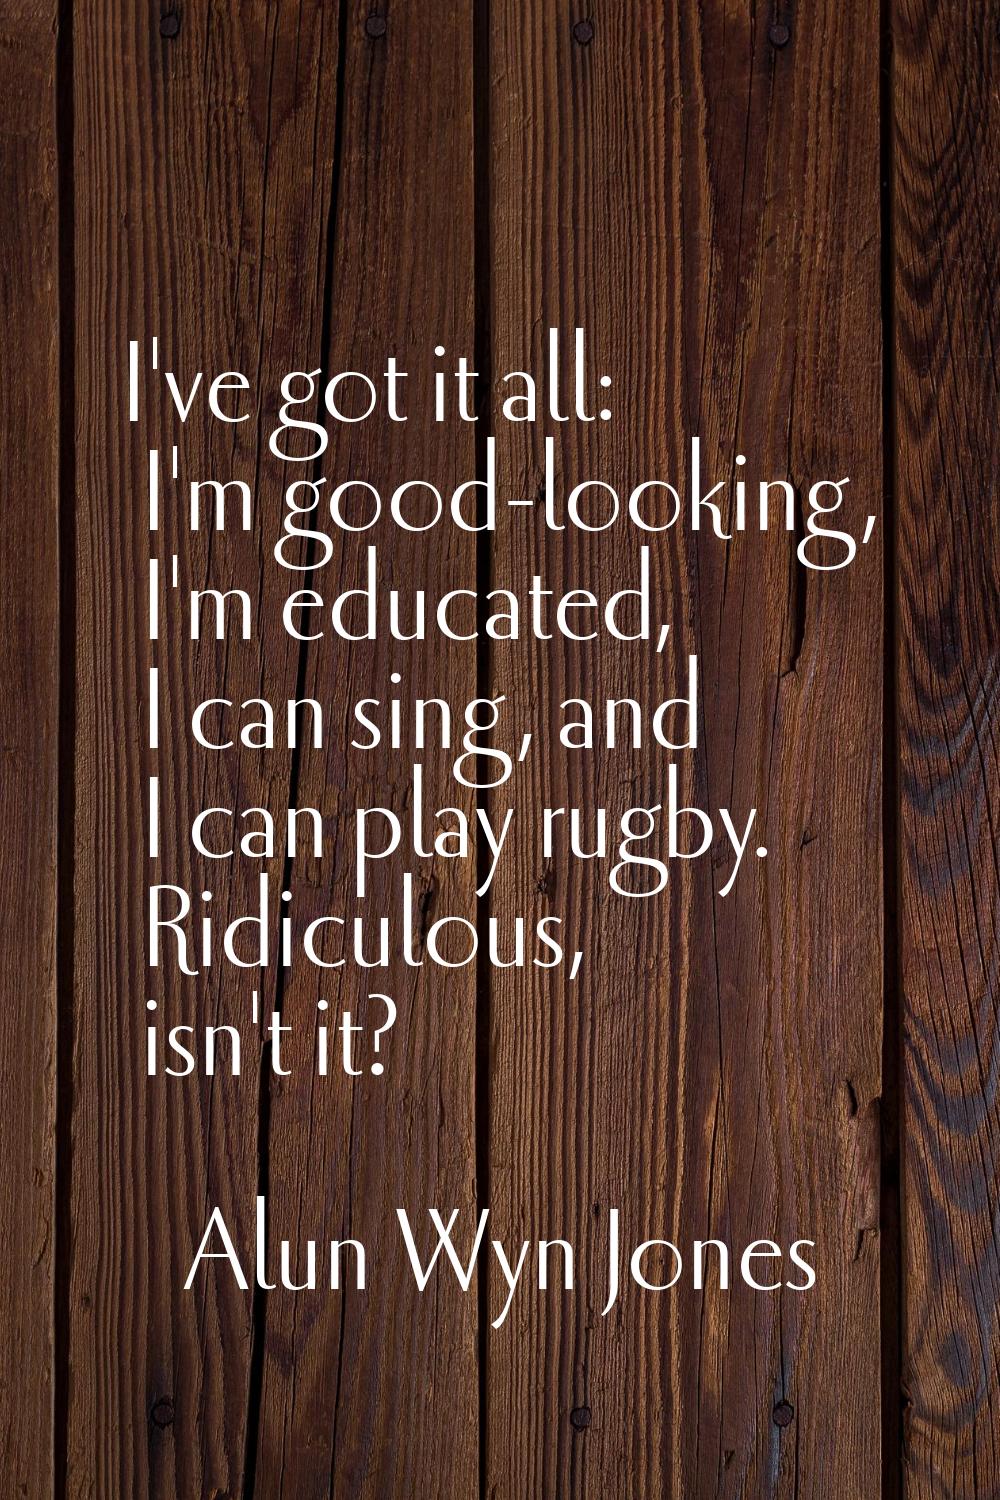 I've got it all: I'm good-looking, I'm educated, I can sing, and I can play rugby. Ridiculous, isn'